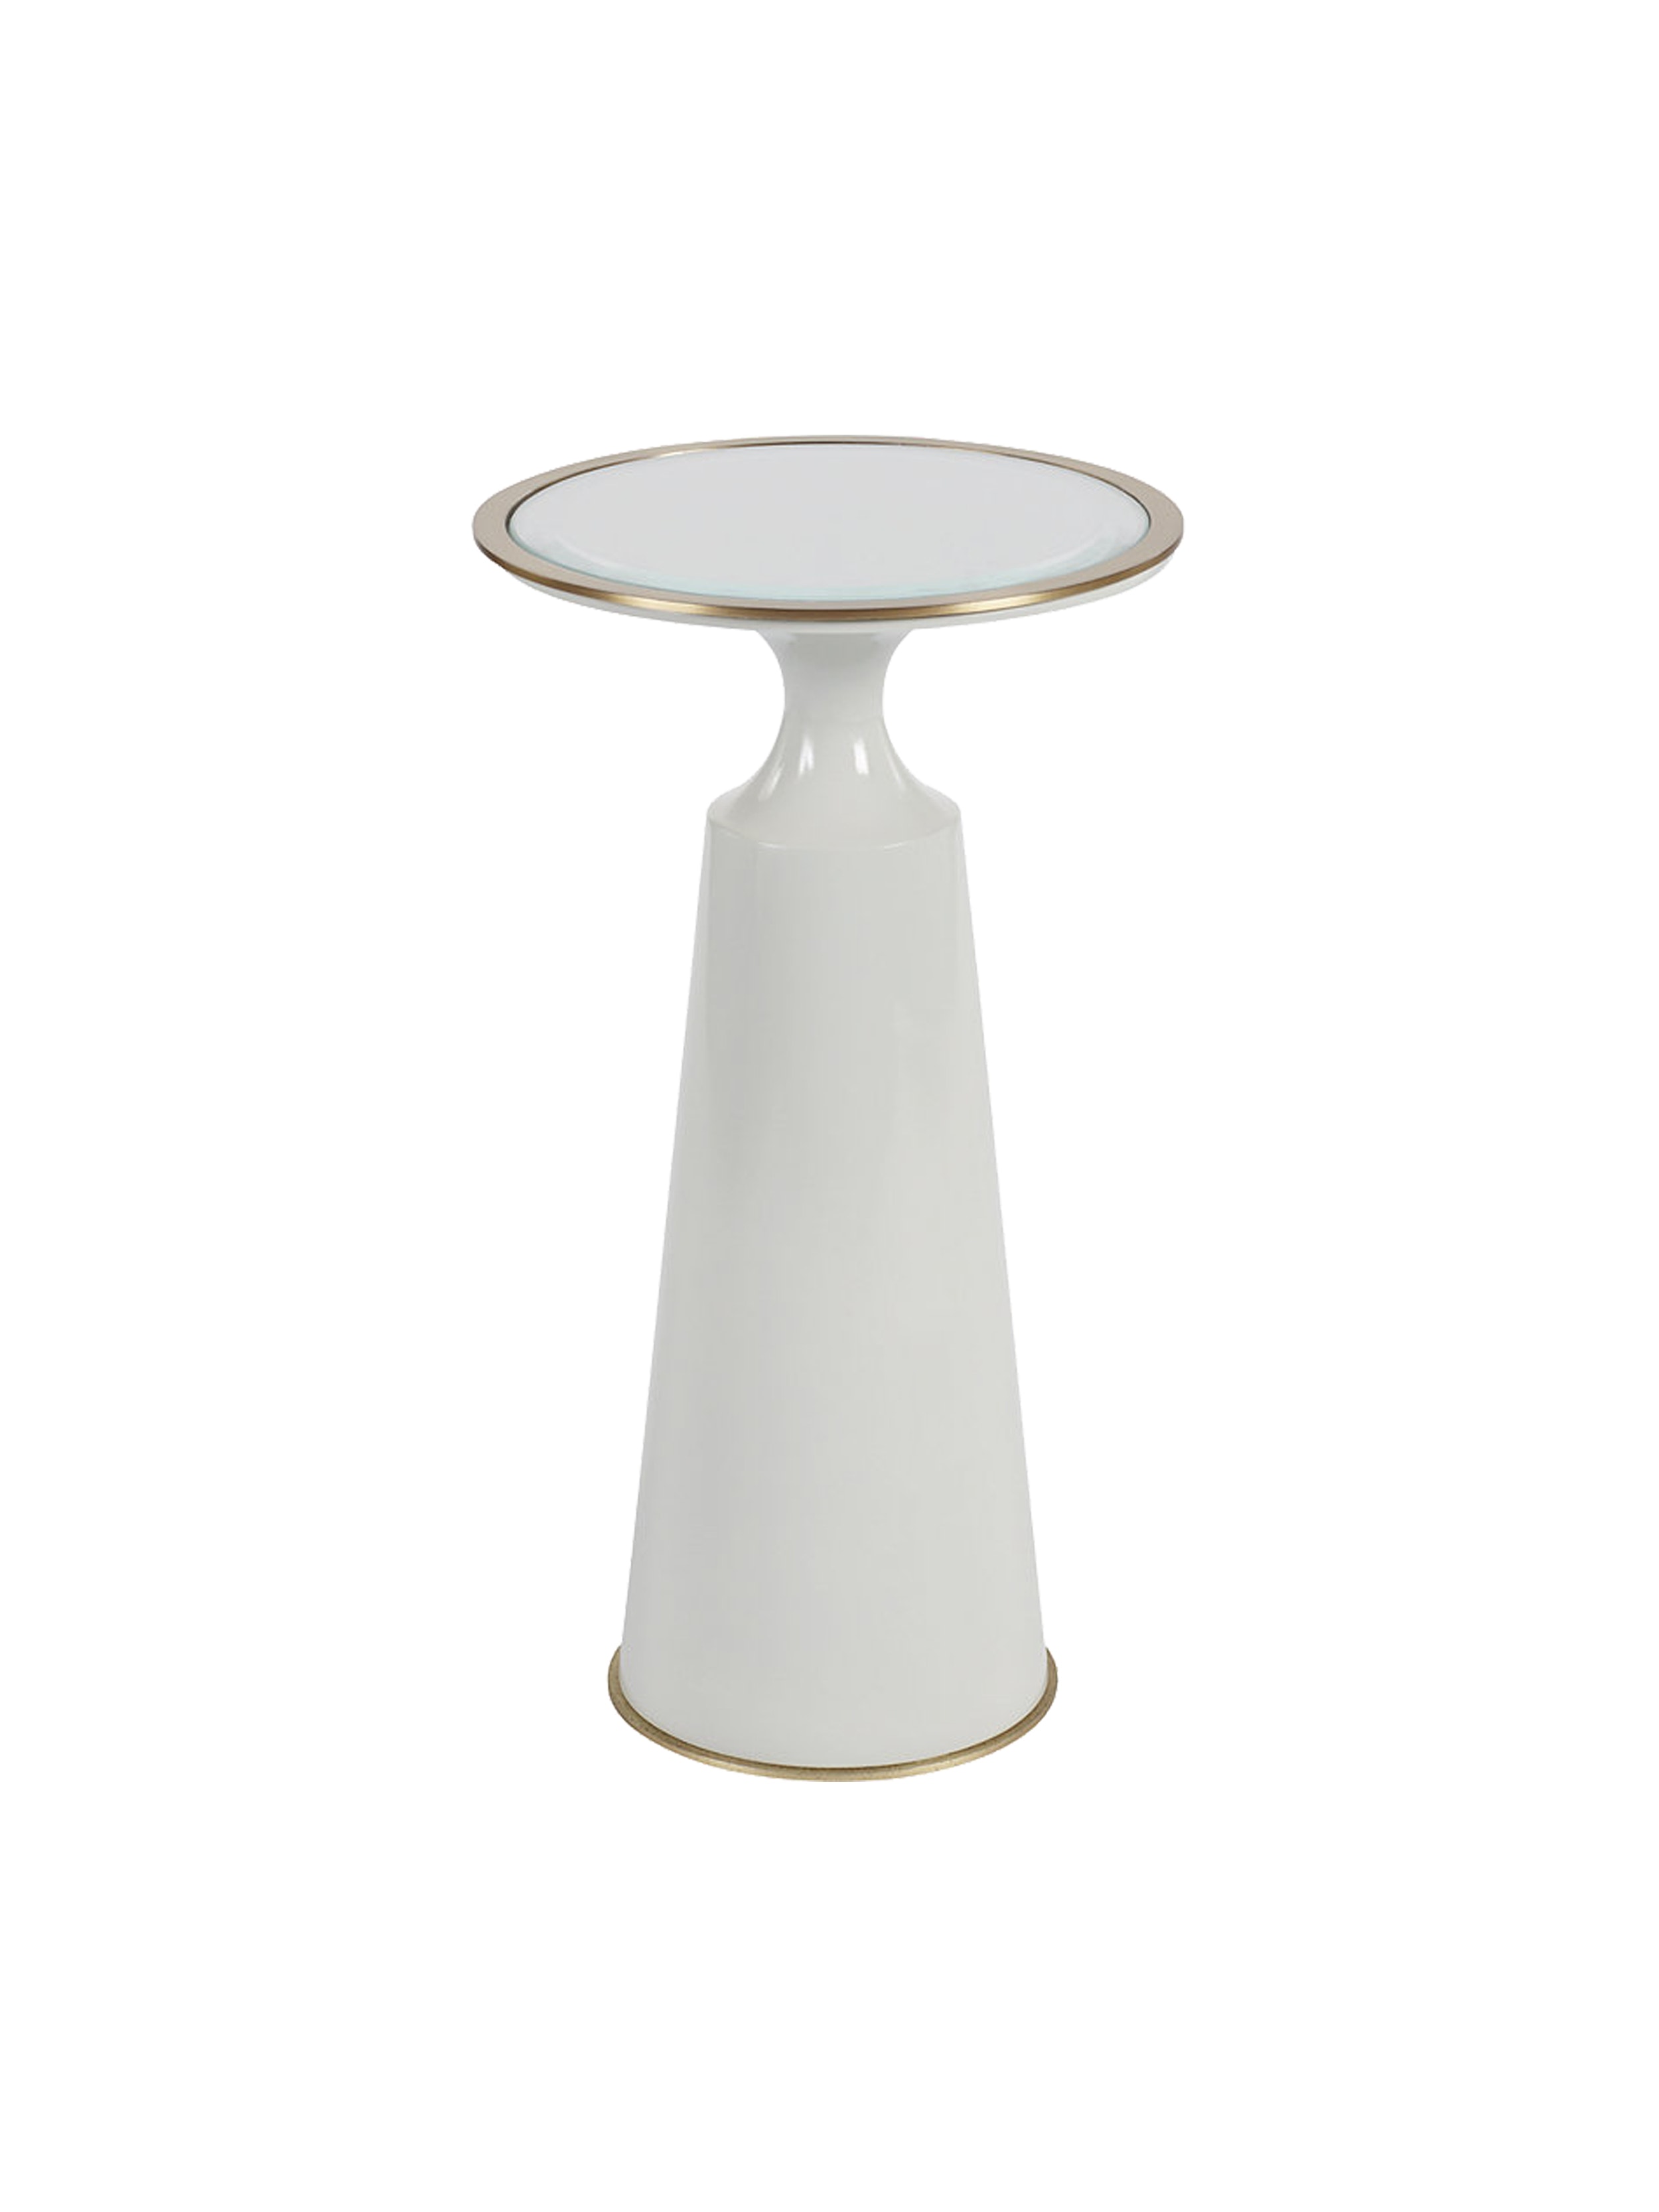 contemporary round accent table with bronze trim putnam mason furniture tables side end glass metal industrial transitional dering hall wood coffee frame white lamp drum throne